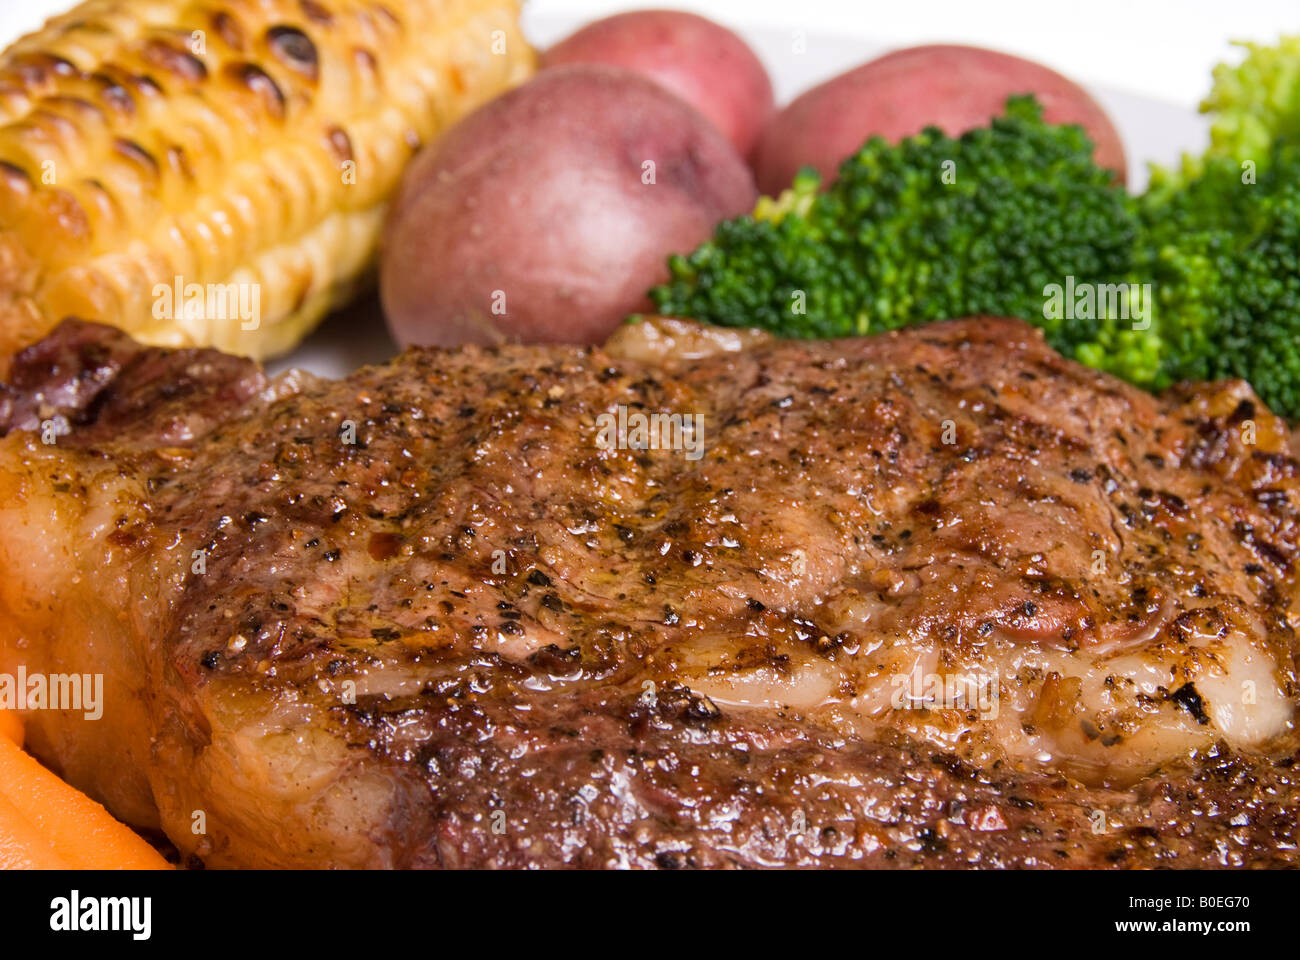 A delicious steak dinner consisting of a filet baby carrots broccoli baby potatoes and corn on the cob Stock Photo